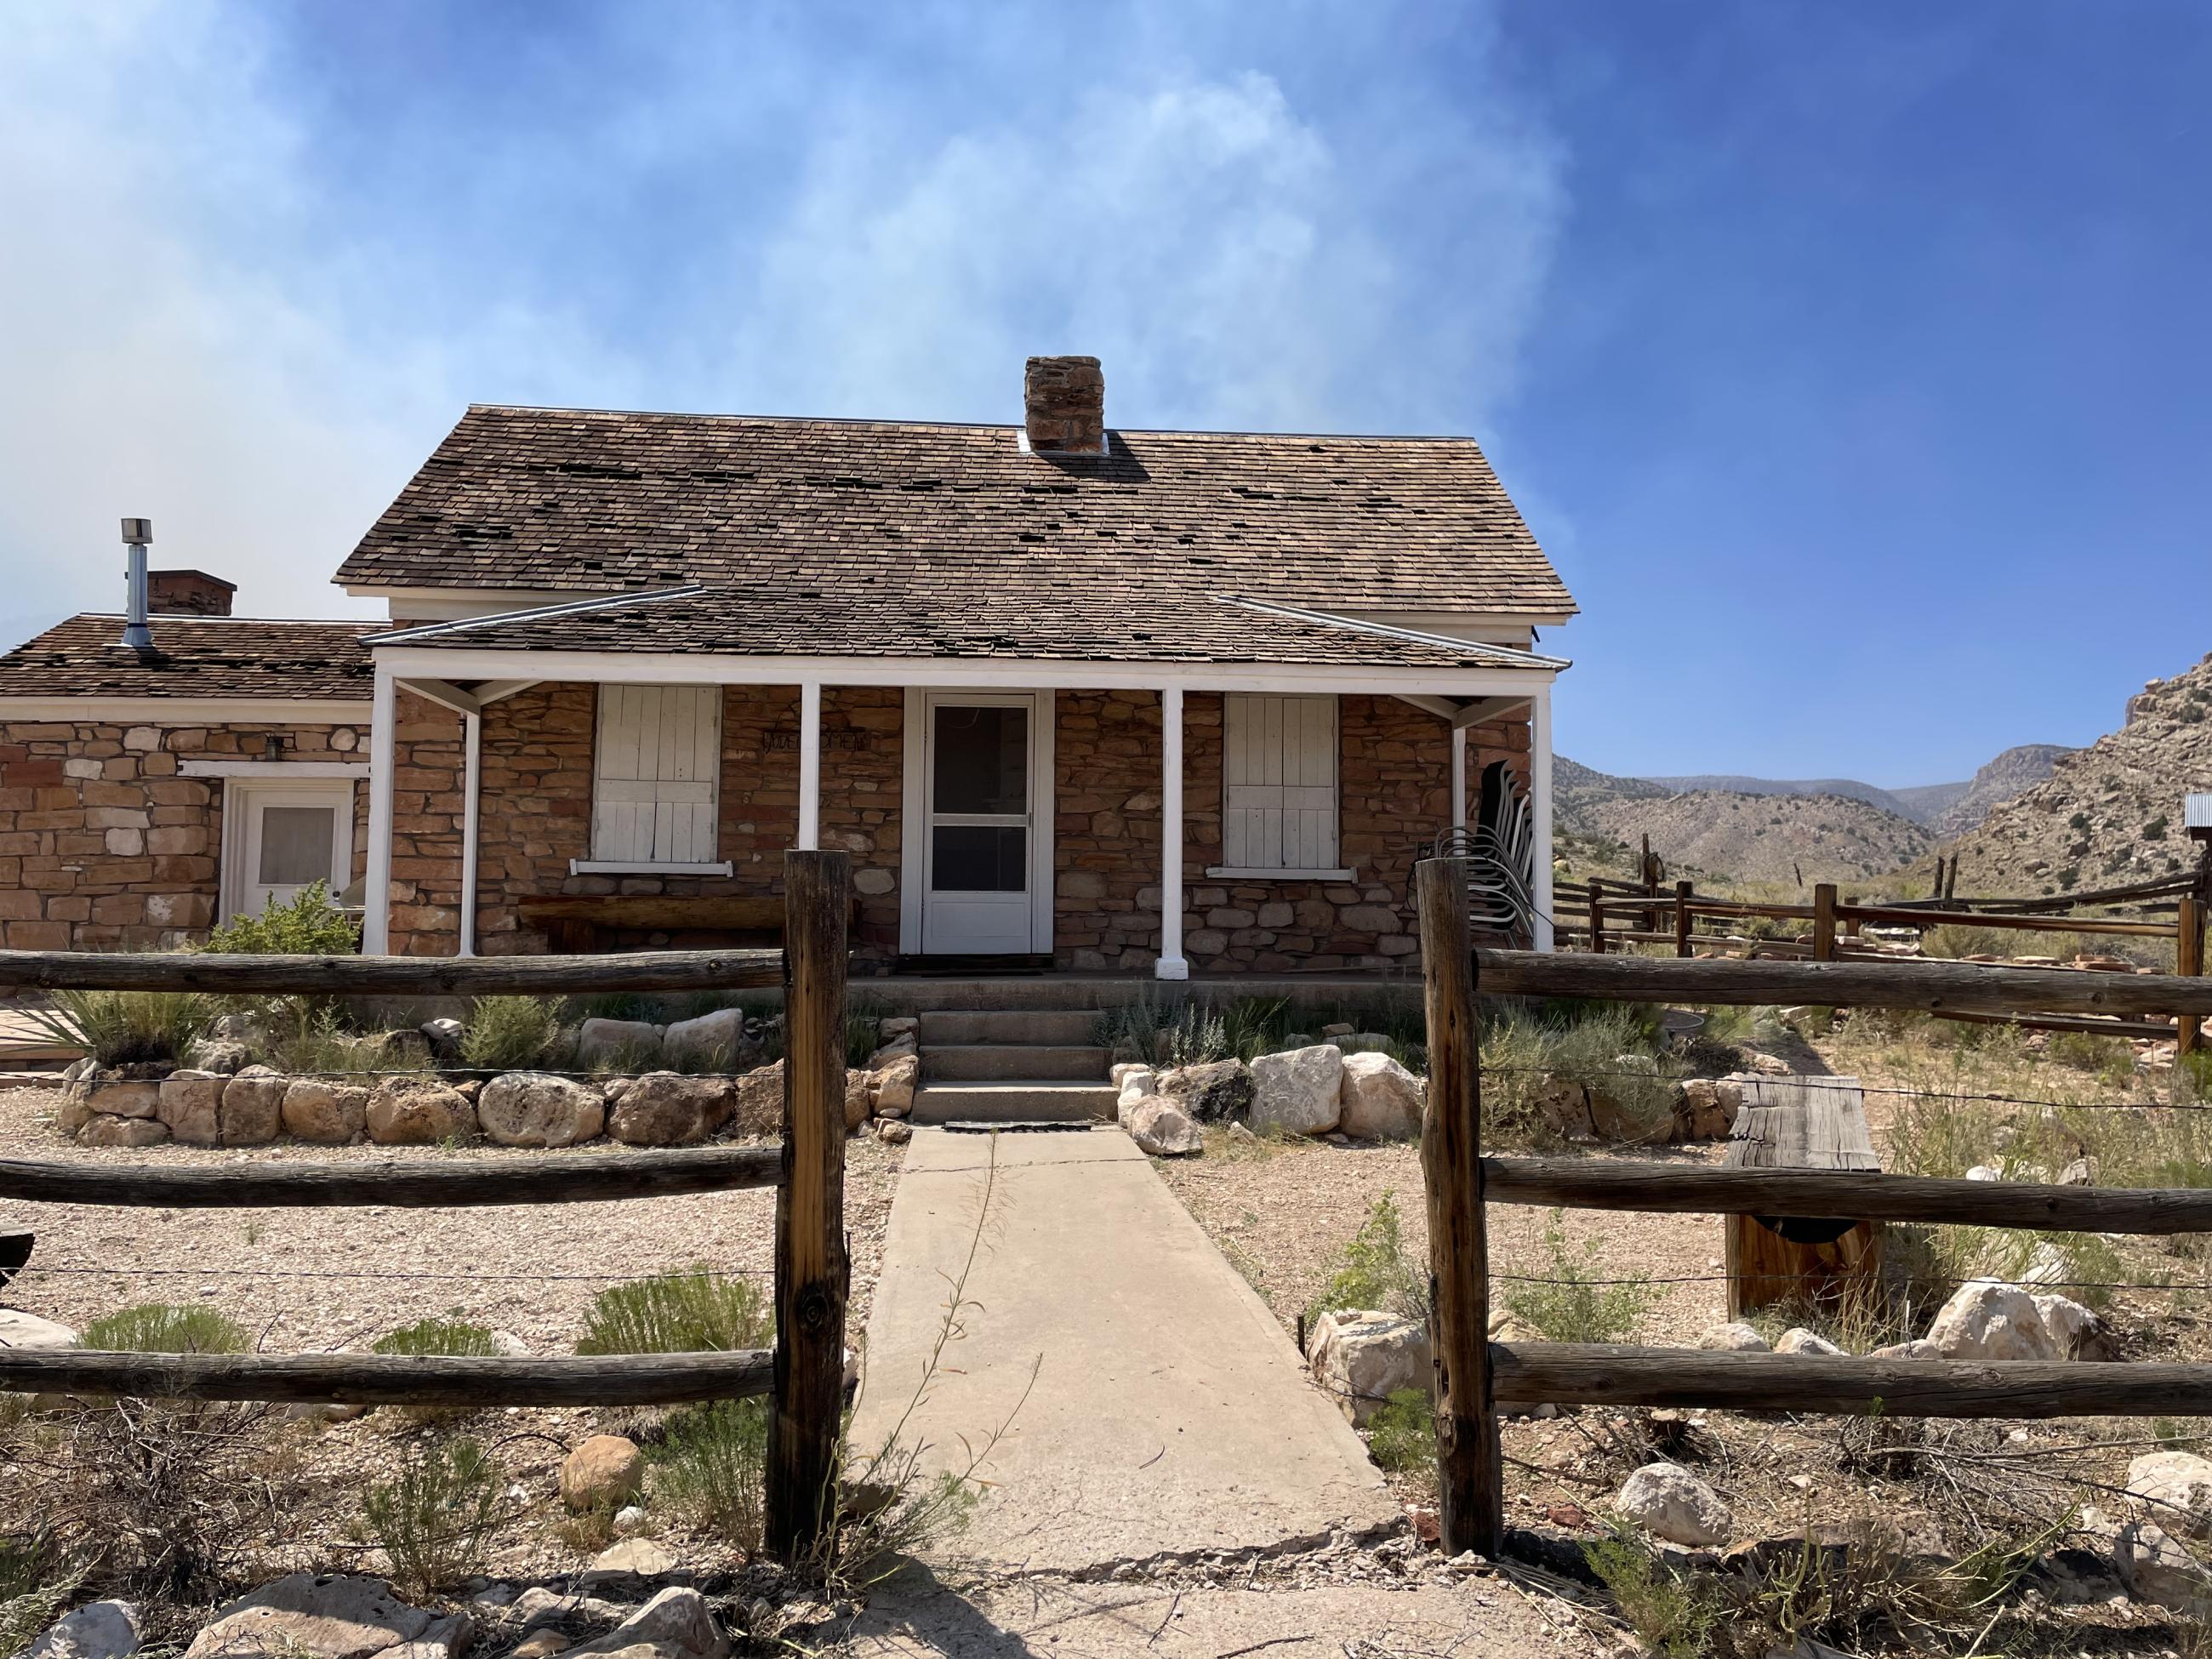 historic kane ranch house with smoke in background